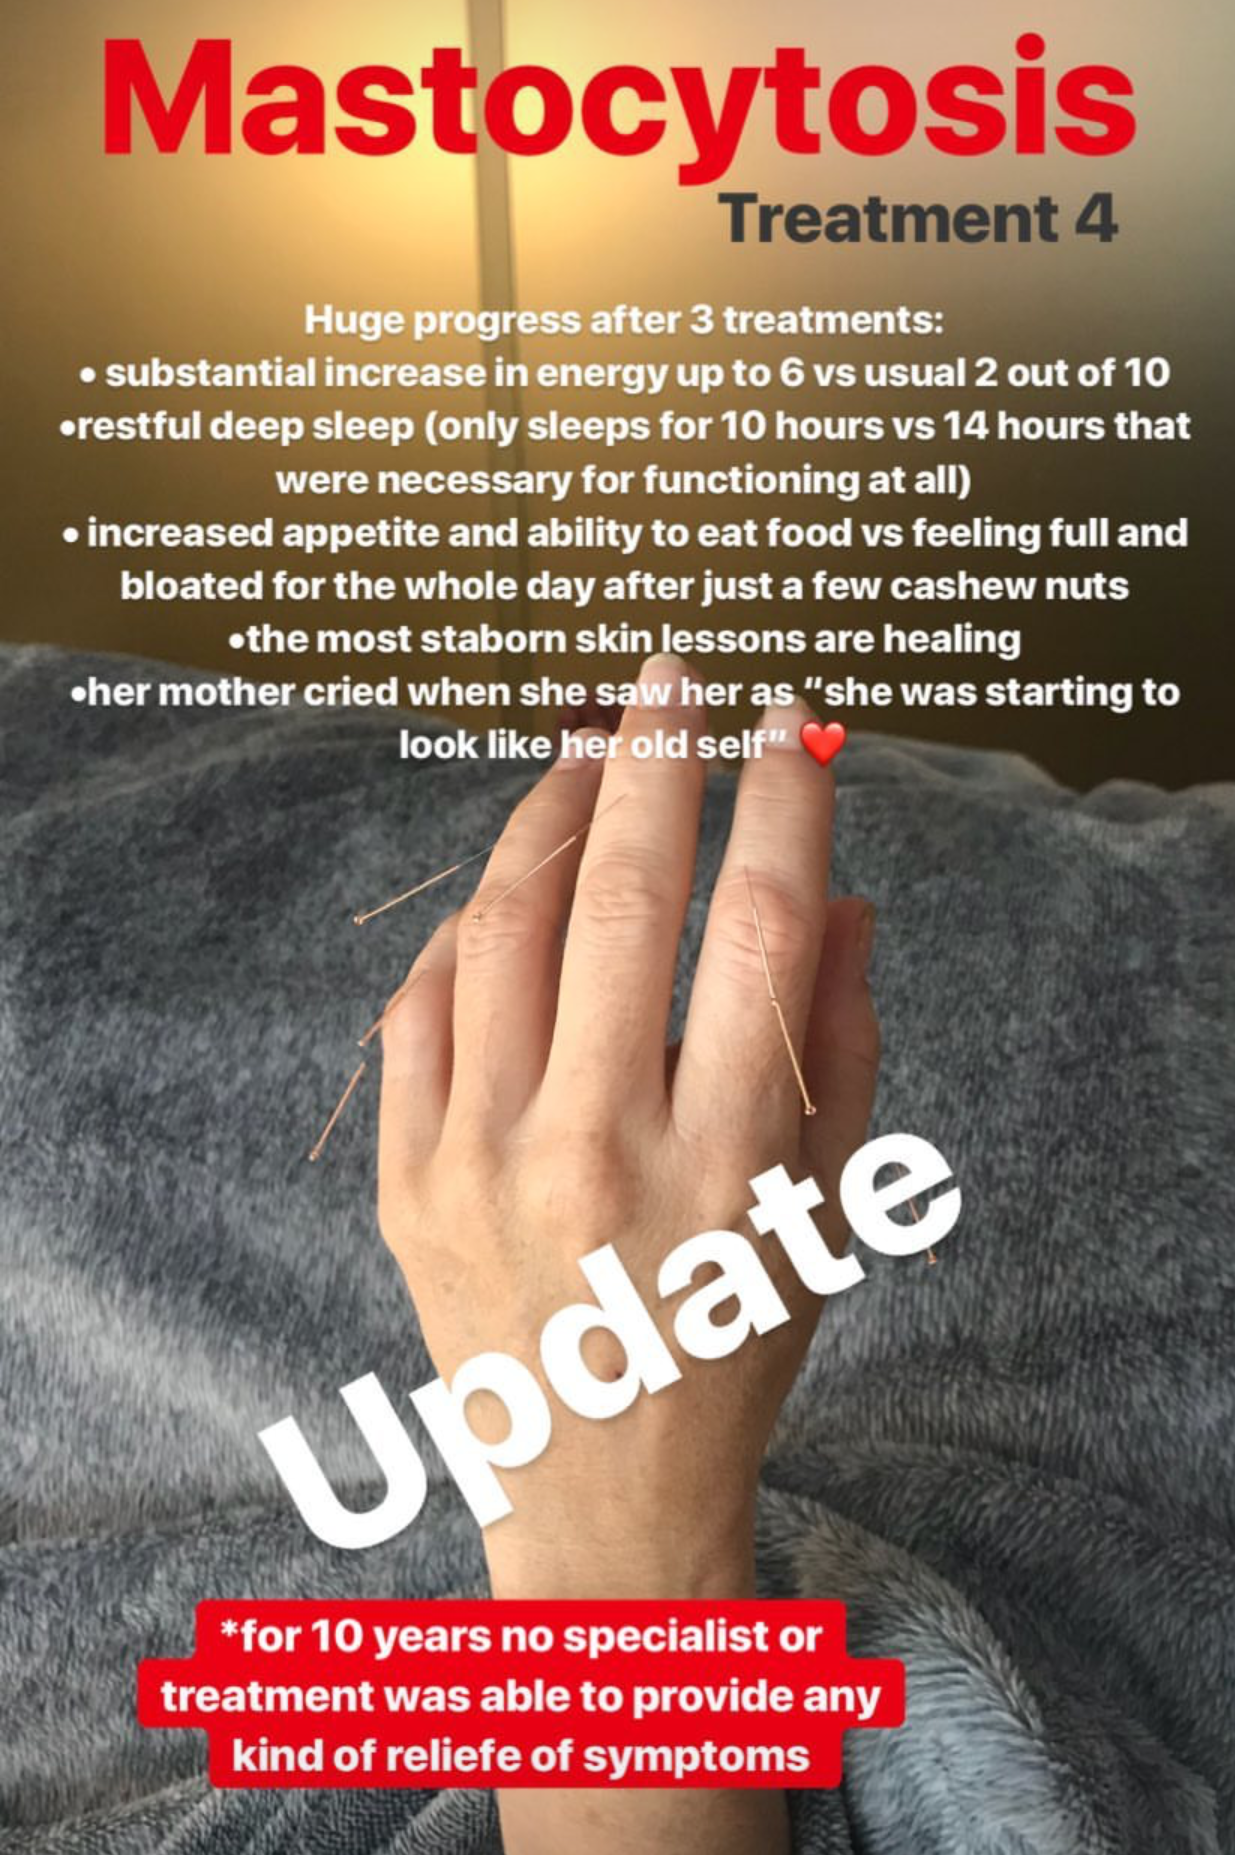  Continuation for autoimmune disease, Mastocytosis. Treatment lead to an increased appetite and decrease in bloating as well as a substantial increase in energy. 